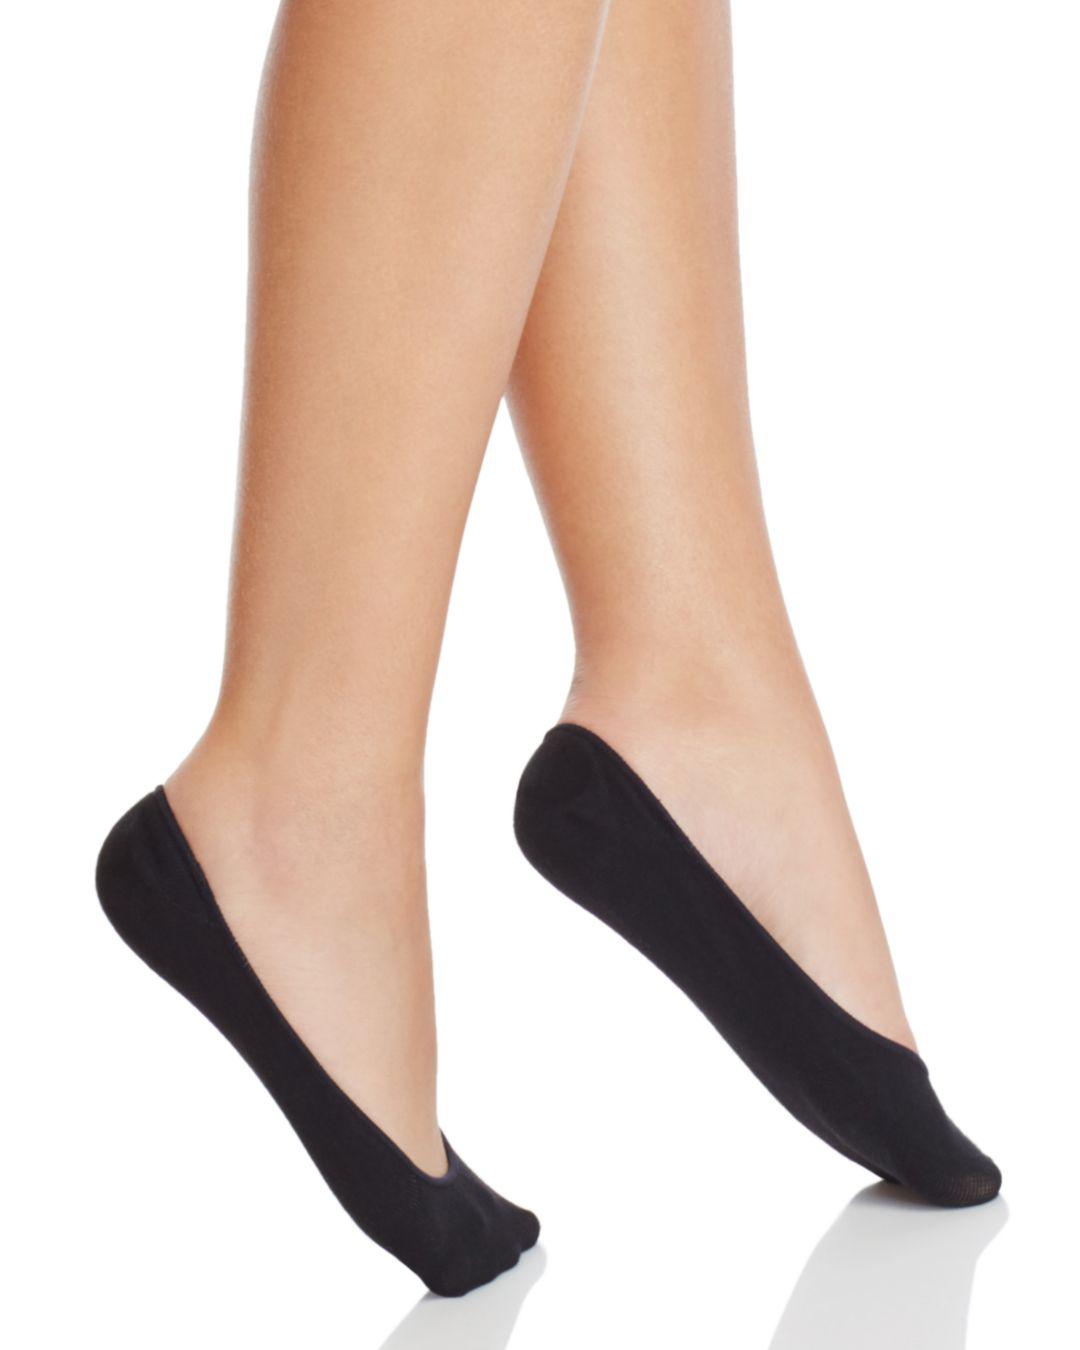 Lyst - Hue Classic Silicone Edge Liner Socks in Black